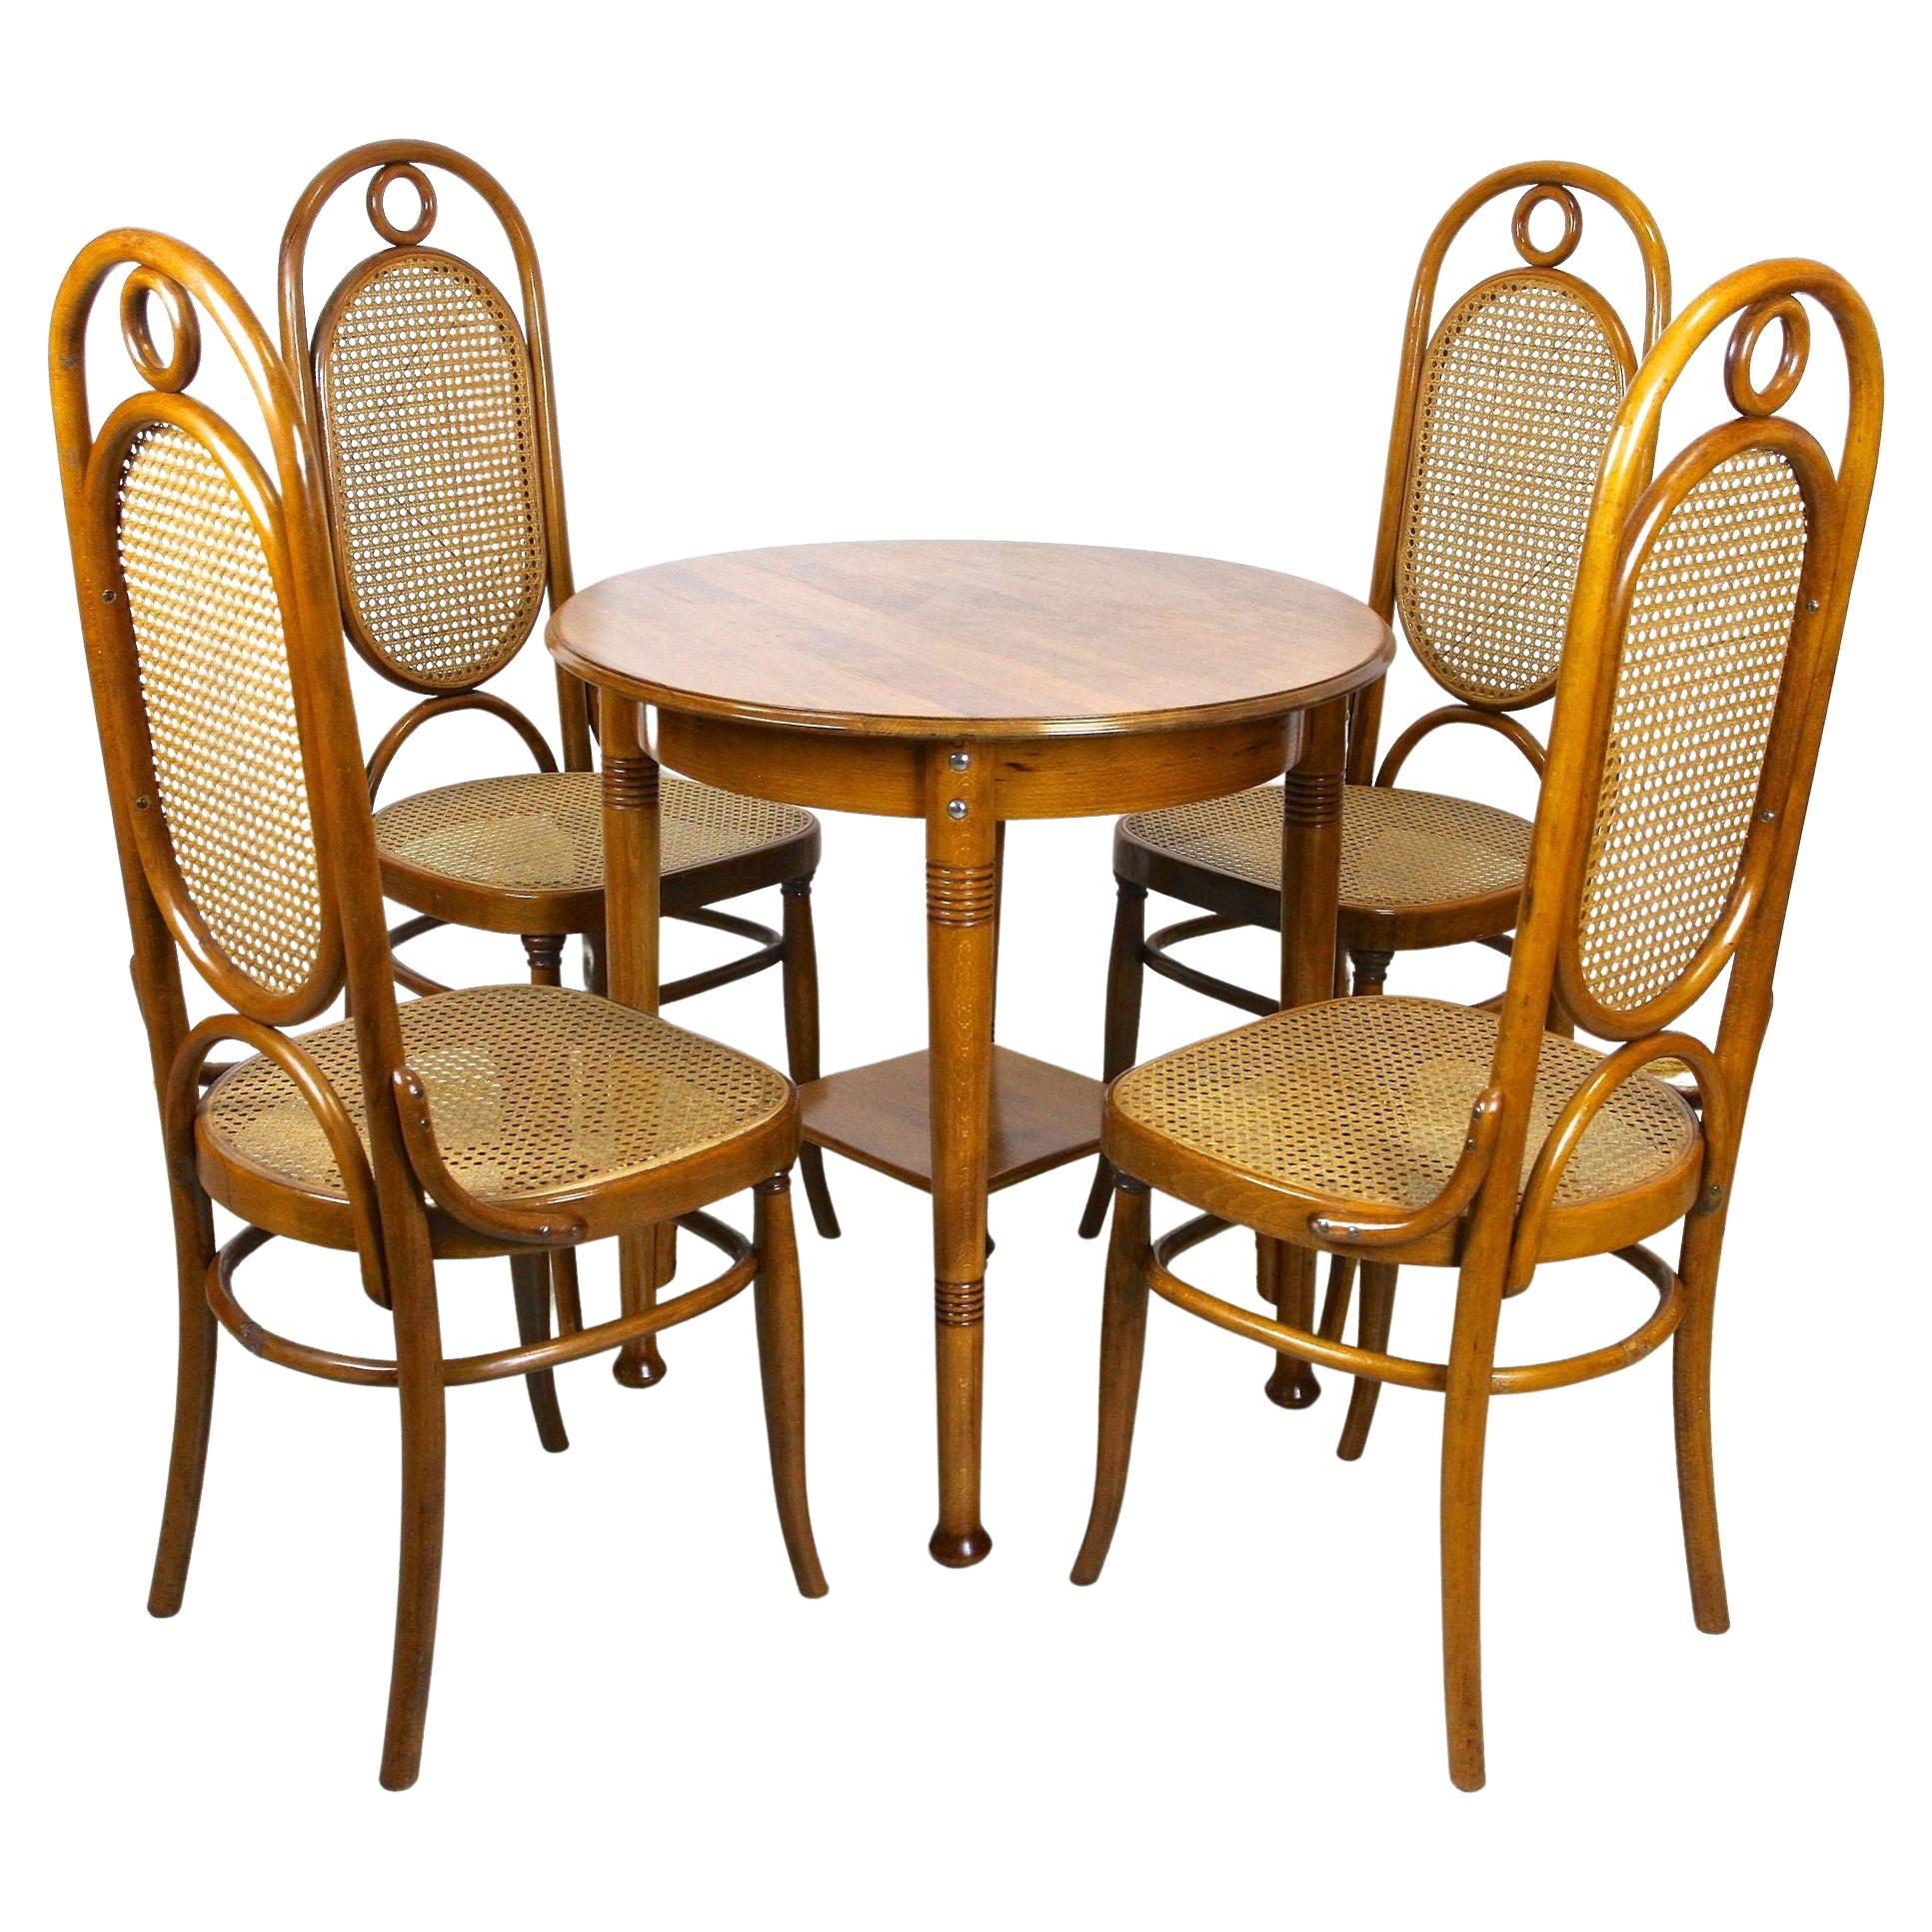 Thonet Bentwood Chairs with Table, Art Nouveau Seating Set, Austria, circa 1915 For Sale